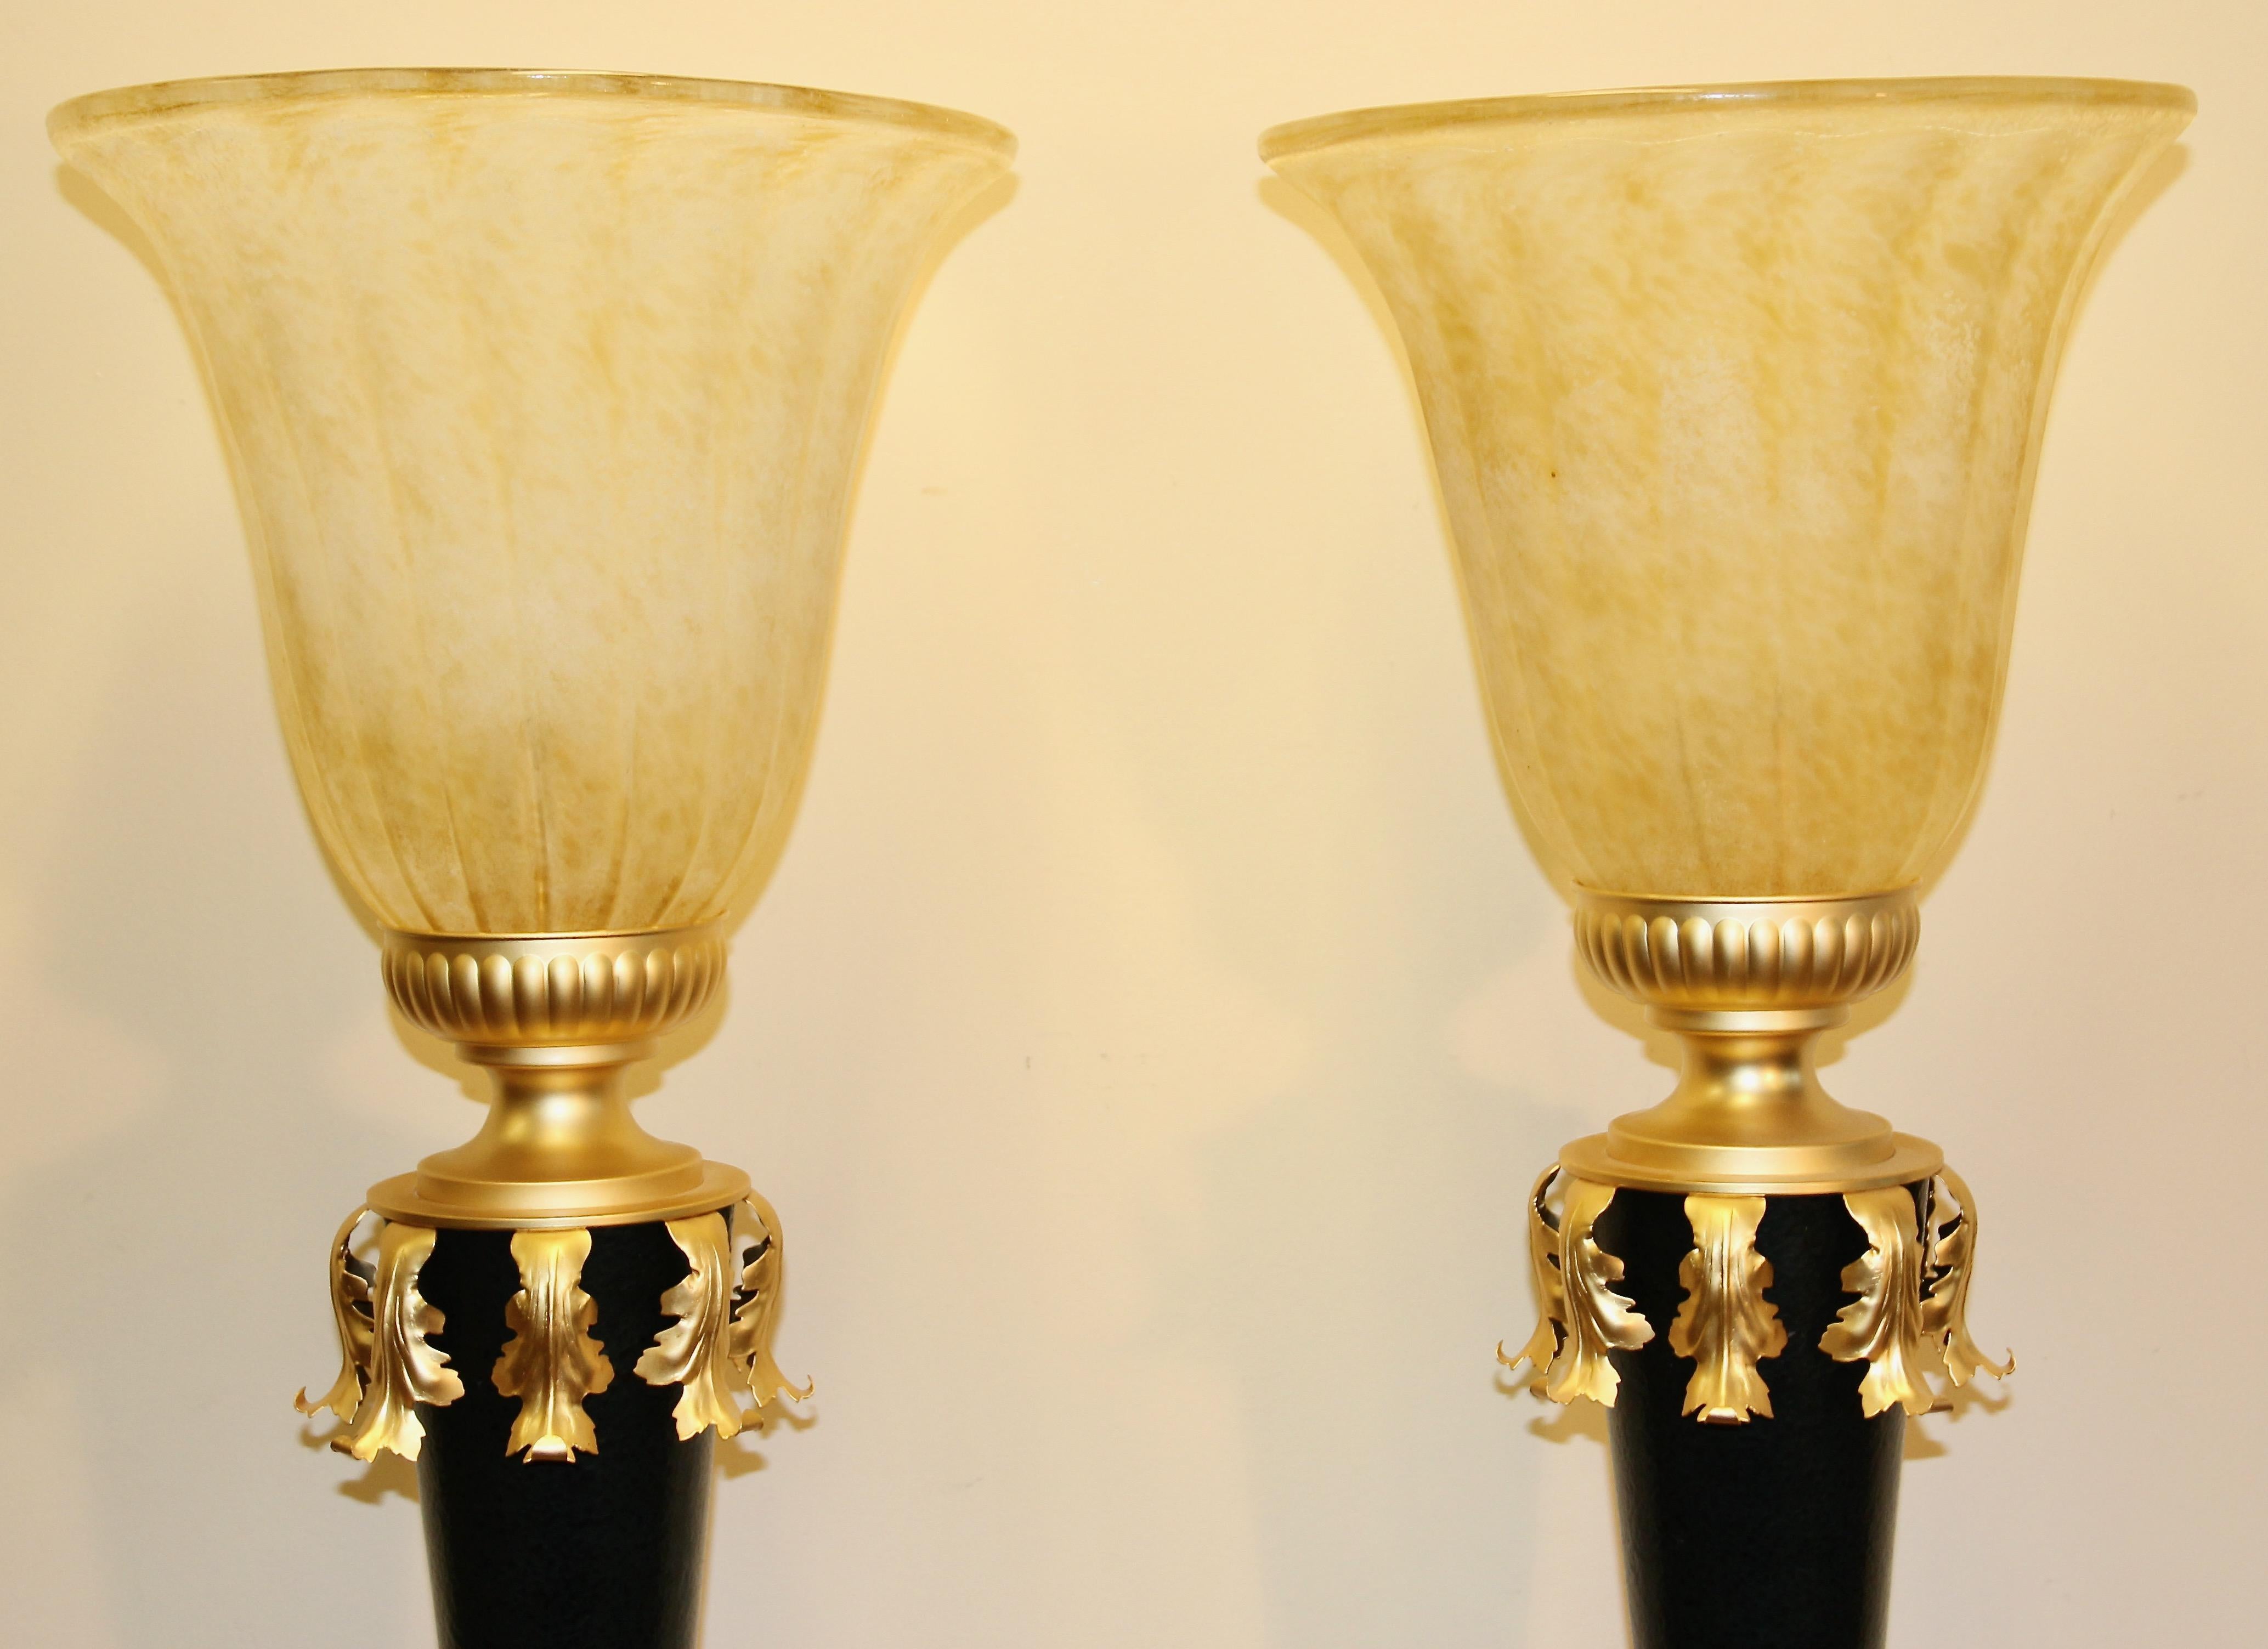 Very decorative, heavy and high quality table lamps.

Minimal signs of wear.
Glass bowl diameter 34cm (13.38 inch).